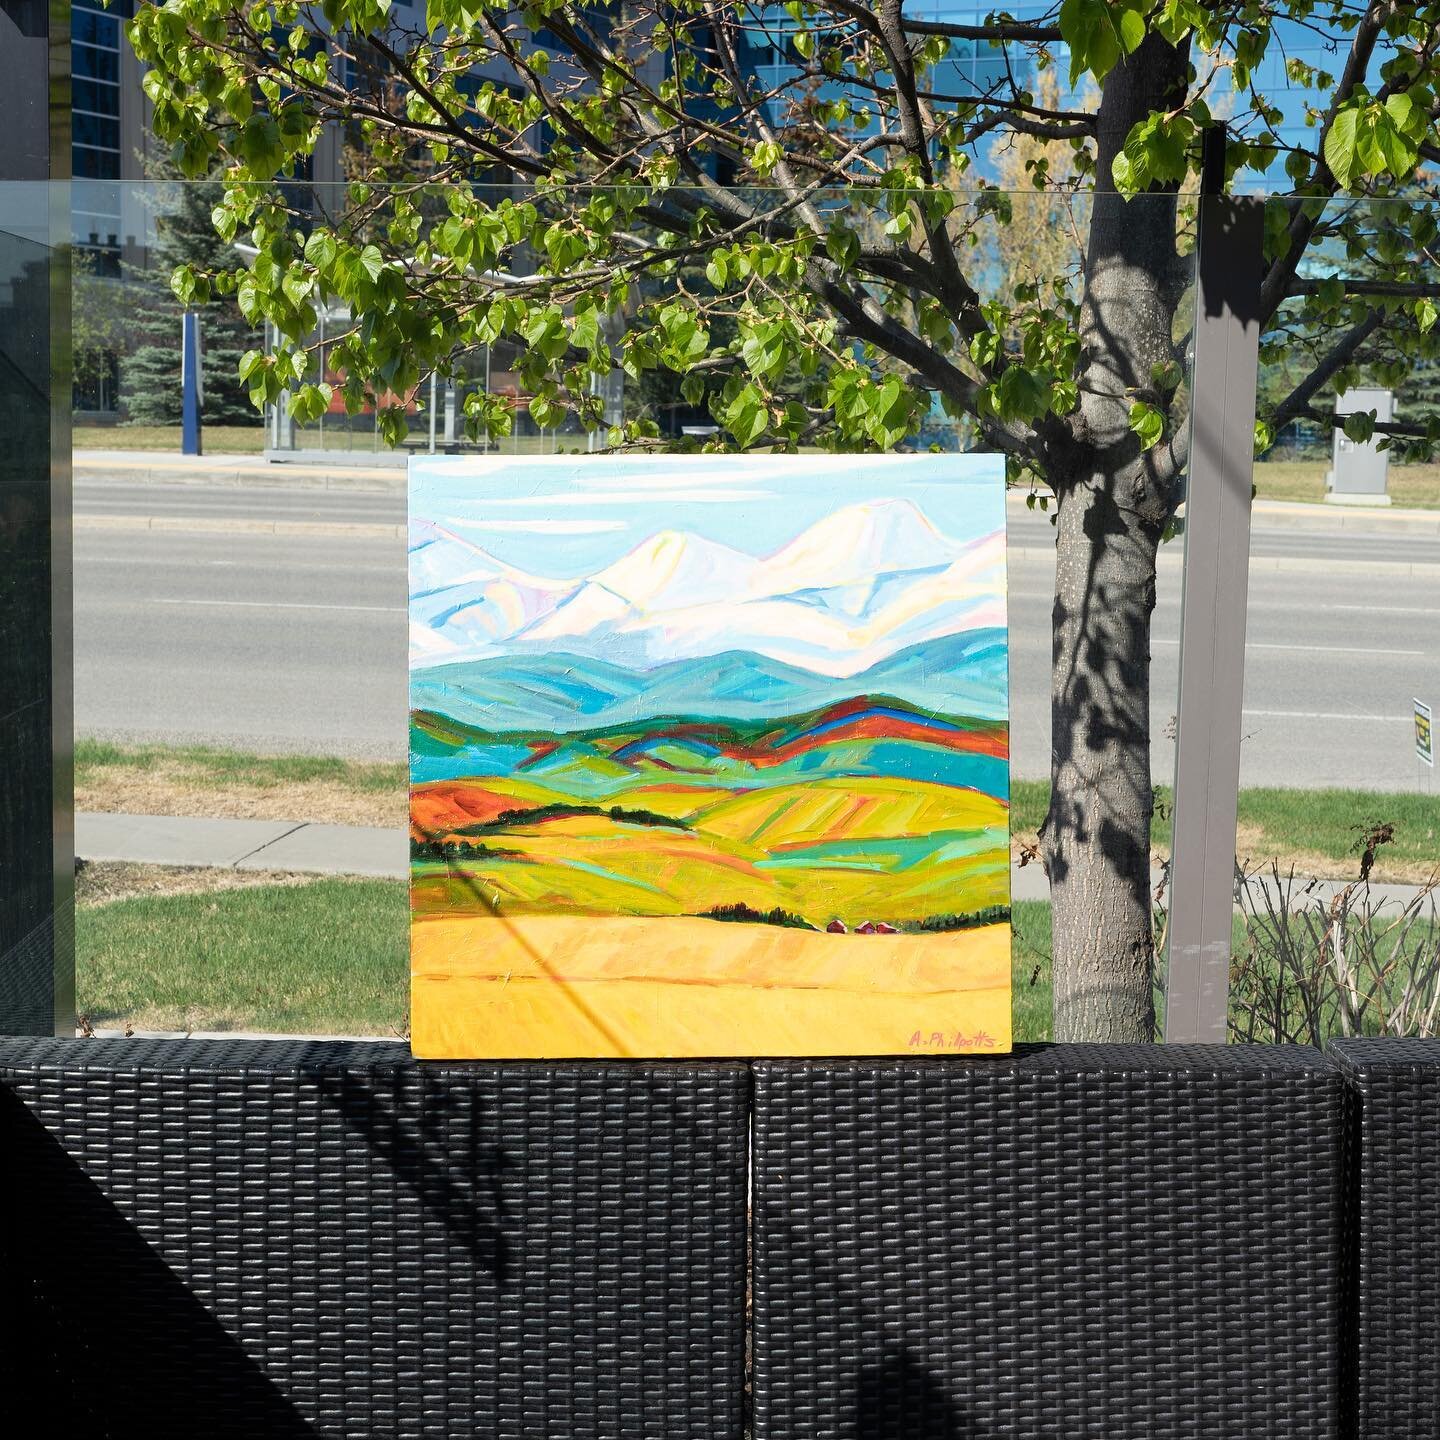 Art at The Park! 🖼 This month we welcome
artist @alisonphilpotts 👩&zwj;🎨 All artwork is for sale, with 100% of sales going to the artist!

Alison specializes in creating large scale landscape paintings using acrylic paint. Her main source of inspi